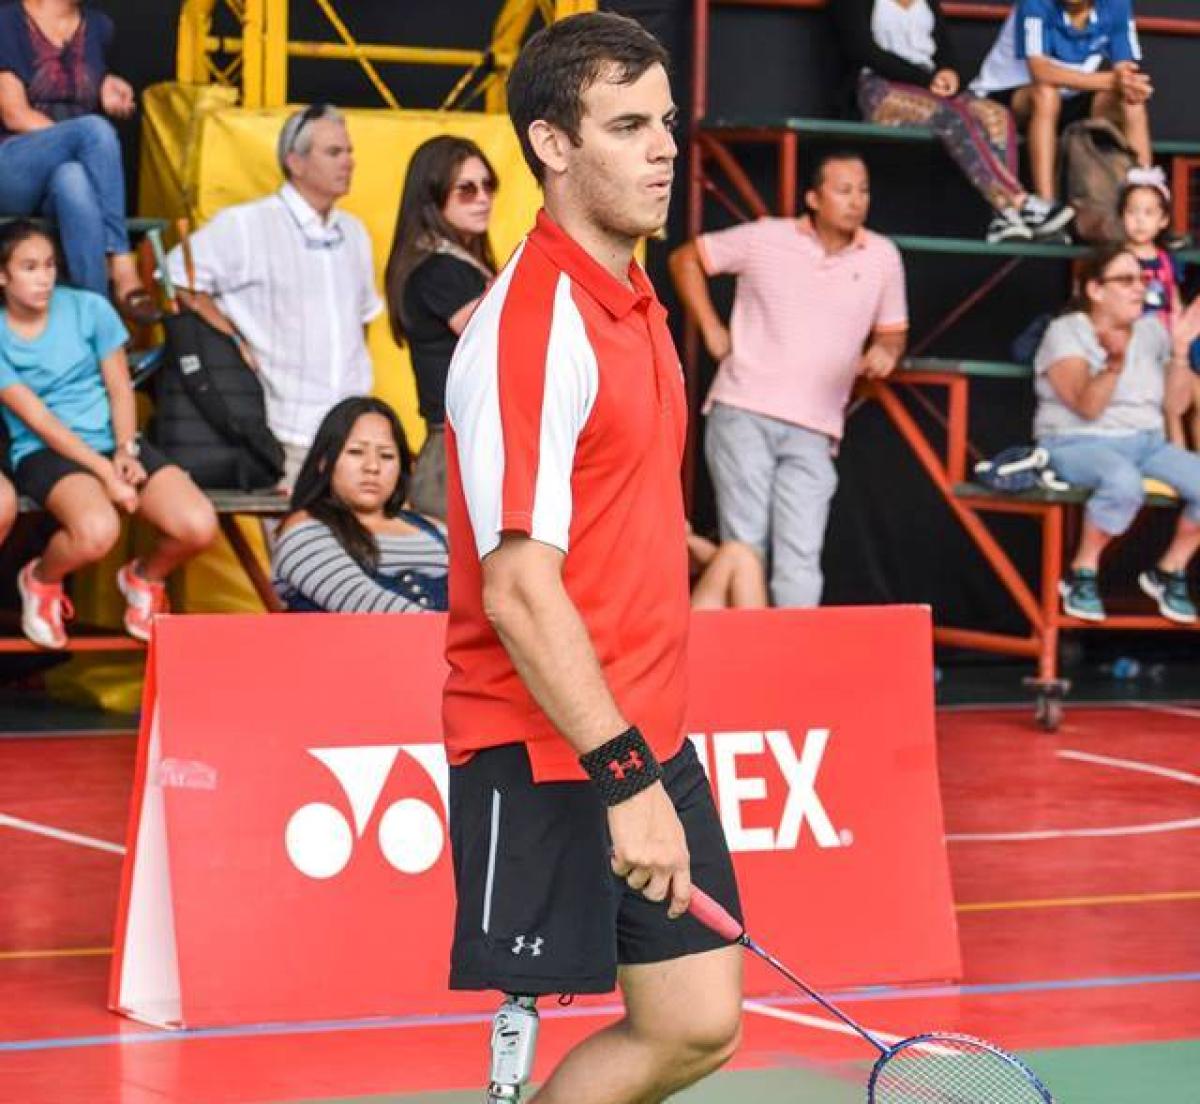 Peruvian male badminton player with prosthetic leg stands holding a racket 